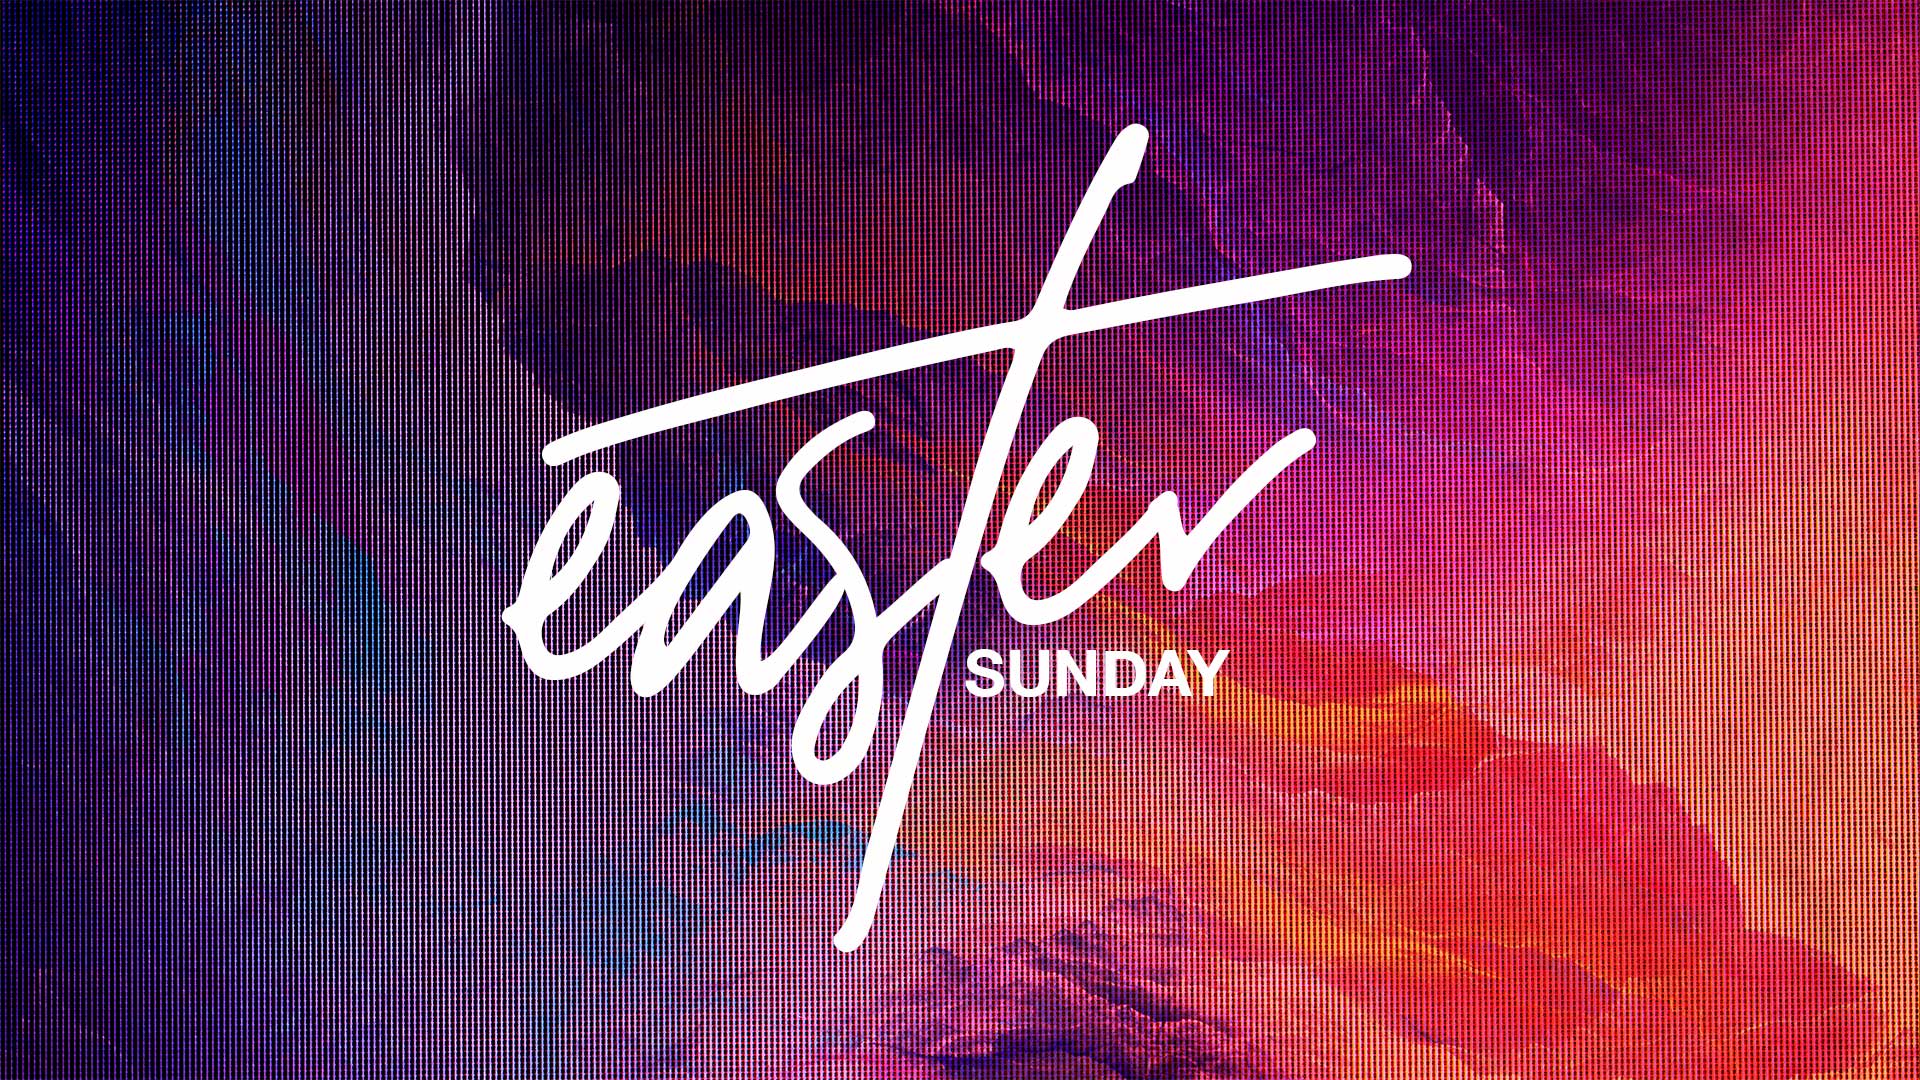 "Easter Sunday 2021" Message